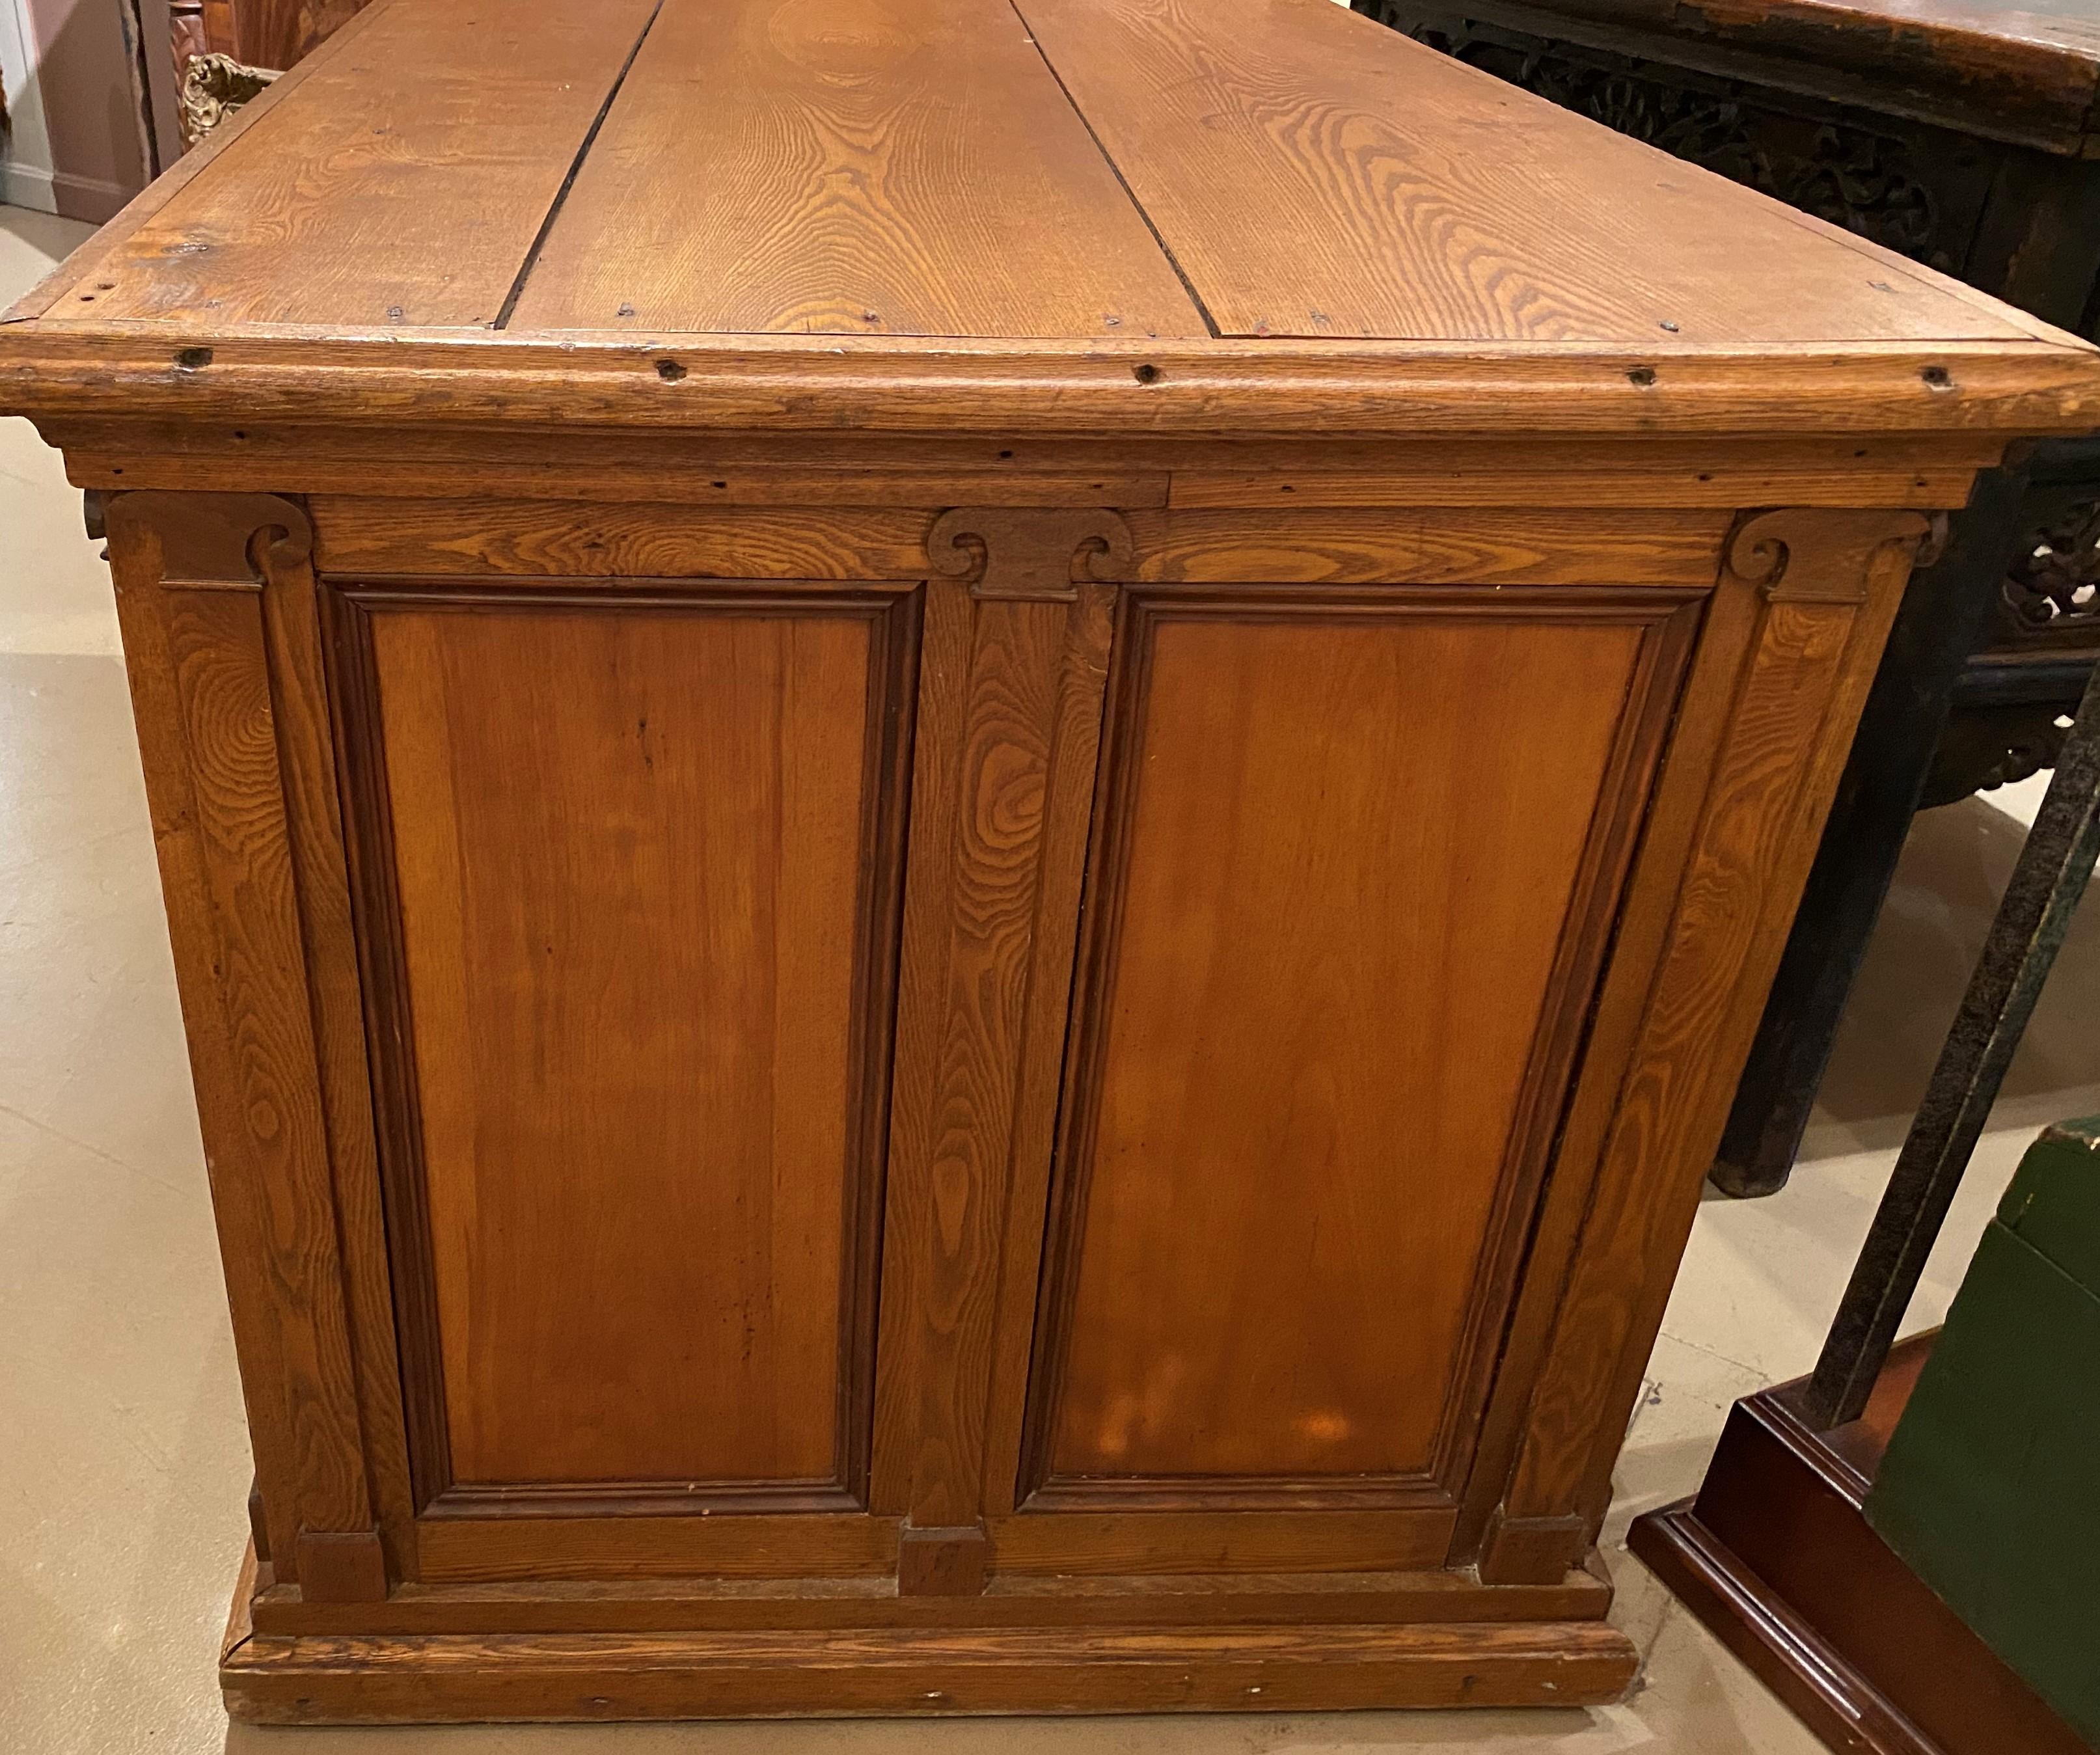 Early 20th Century Oak Store Paneled Counter or Desk w/ Birds Eye Drawer Fronts For Sale 1